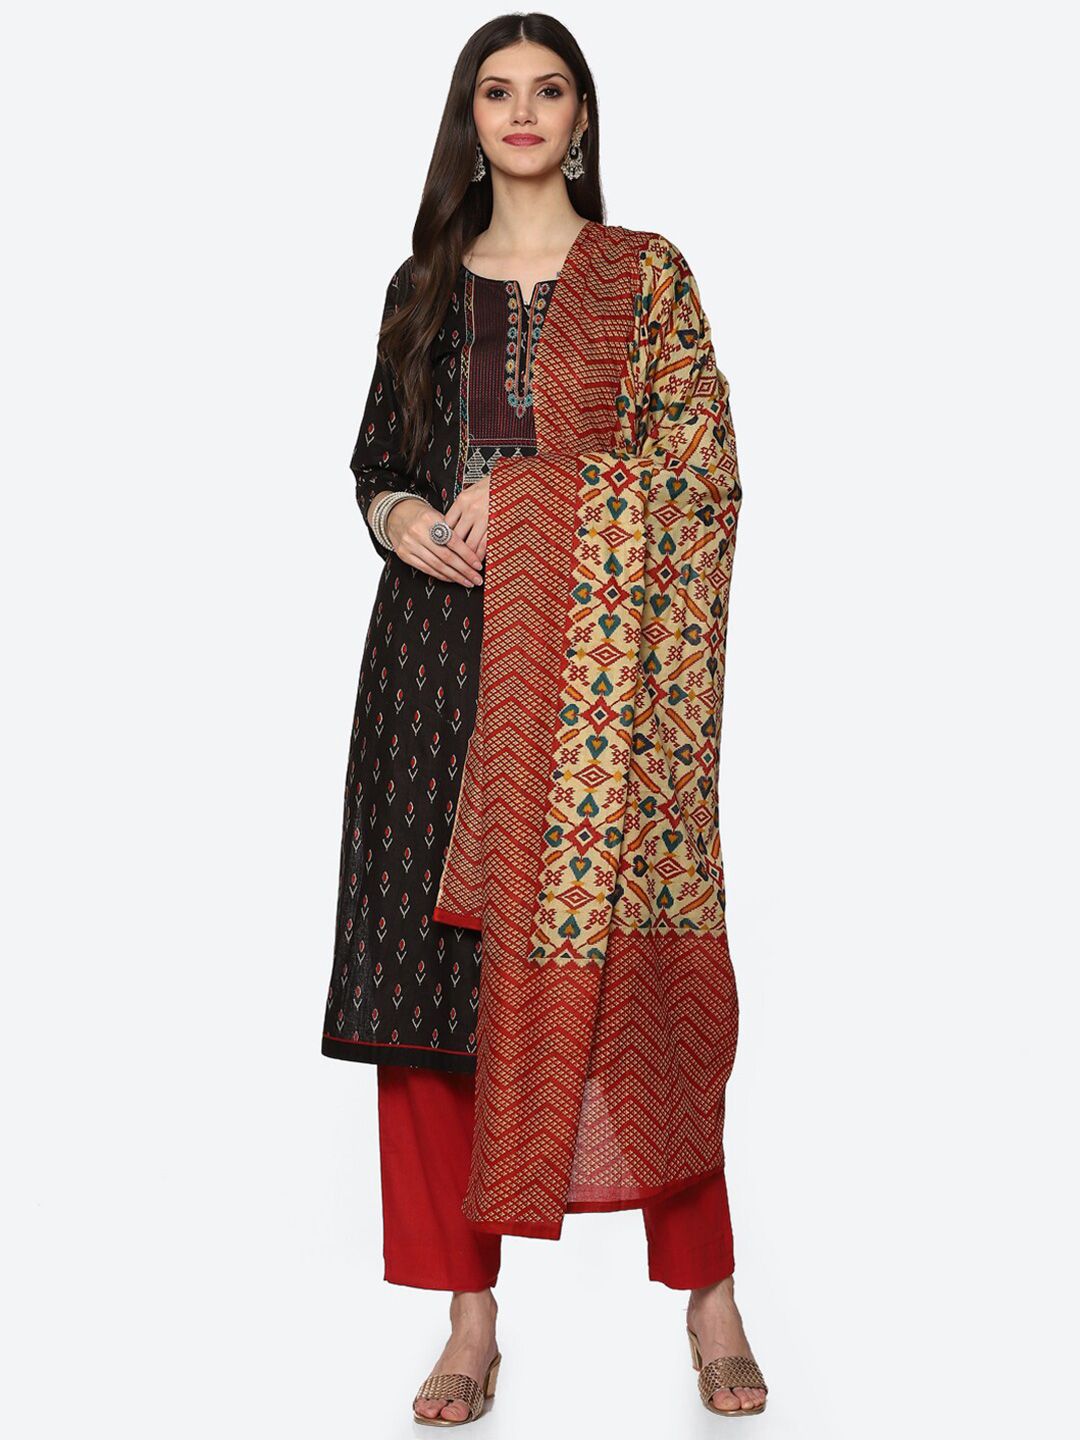 Biba Black & Red Printed Unstitched Dress Material Price in India